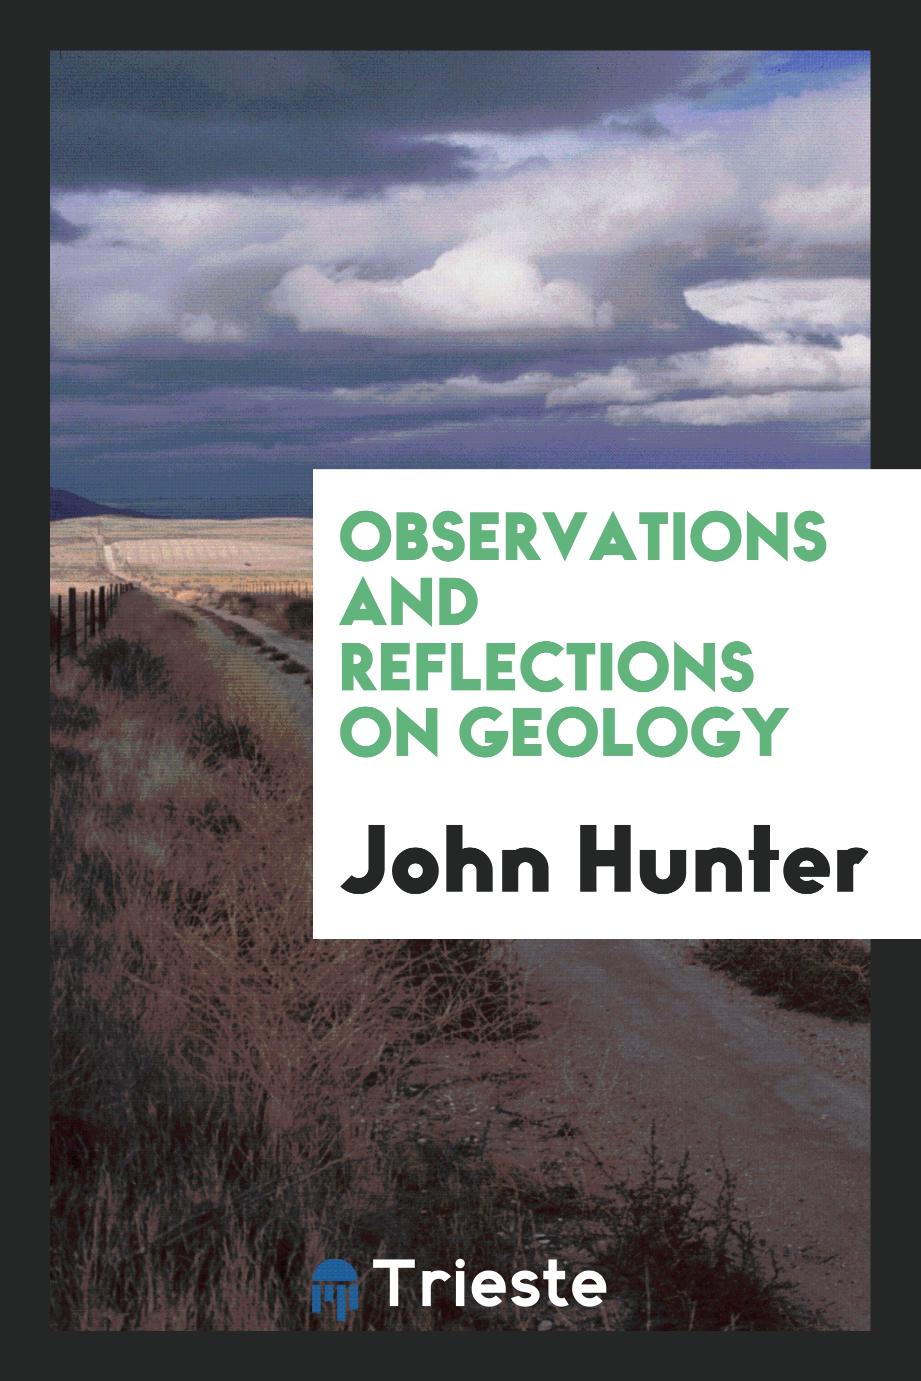 Observations and reflections on geology